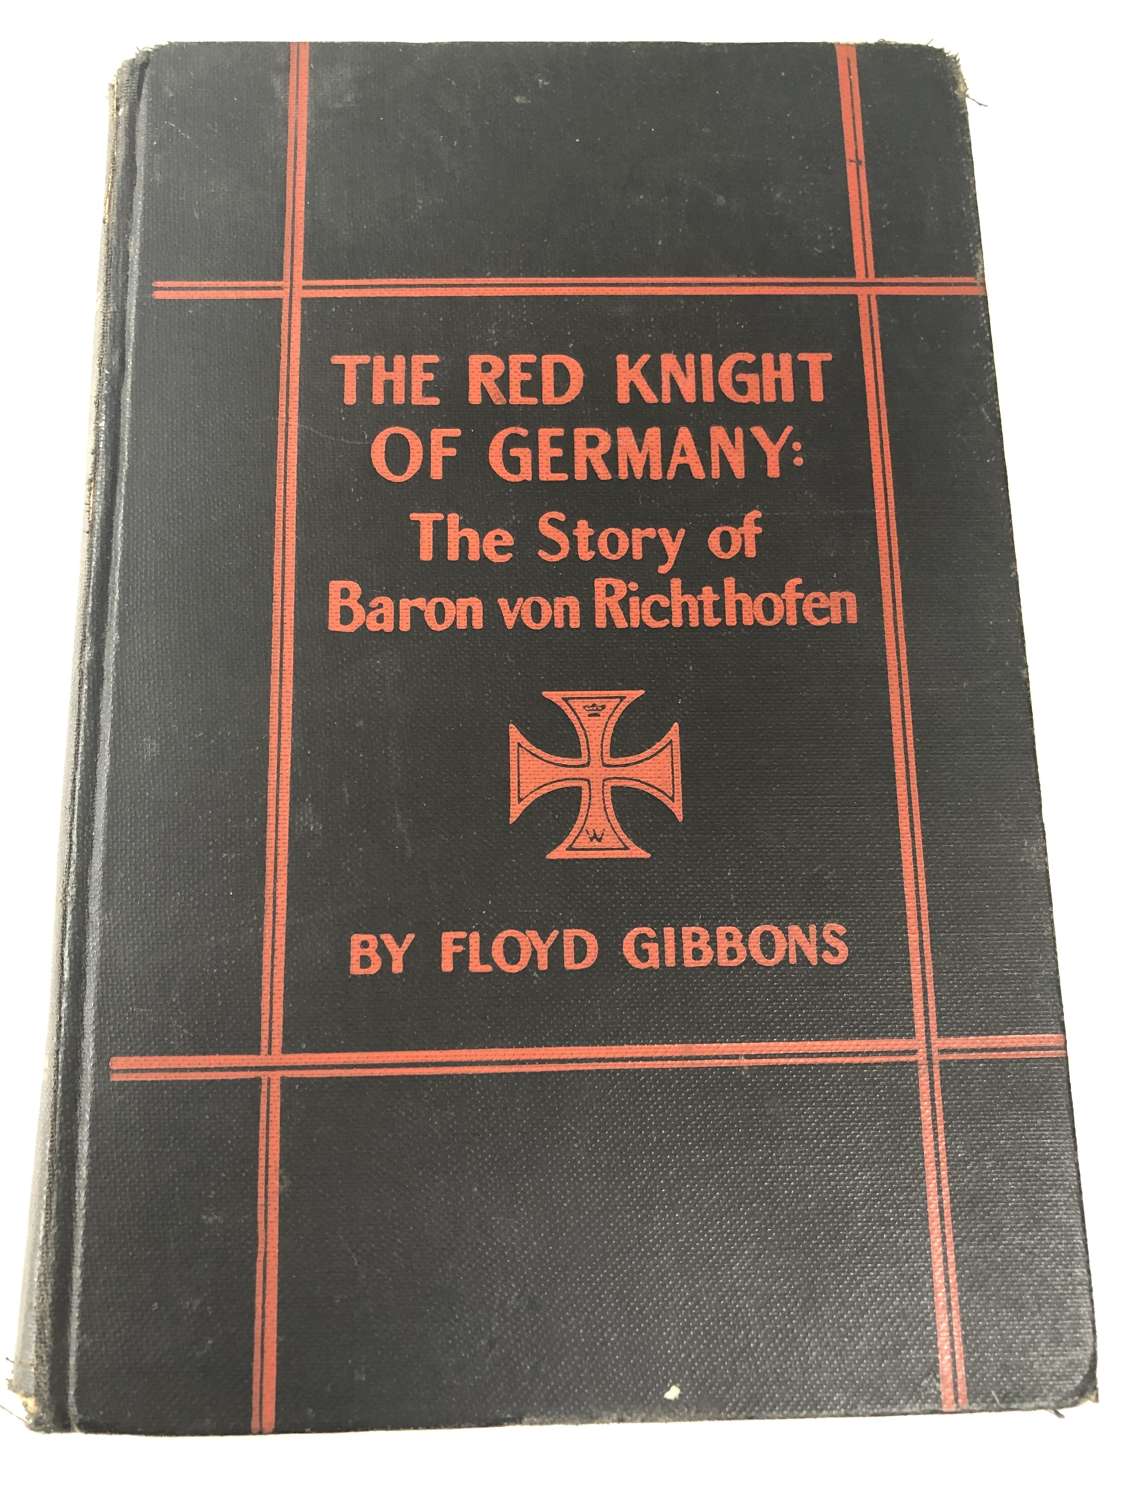 Book “The Red Knight of Germany: The Story of Baron Von Richthofen